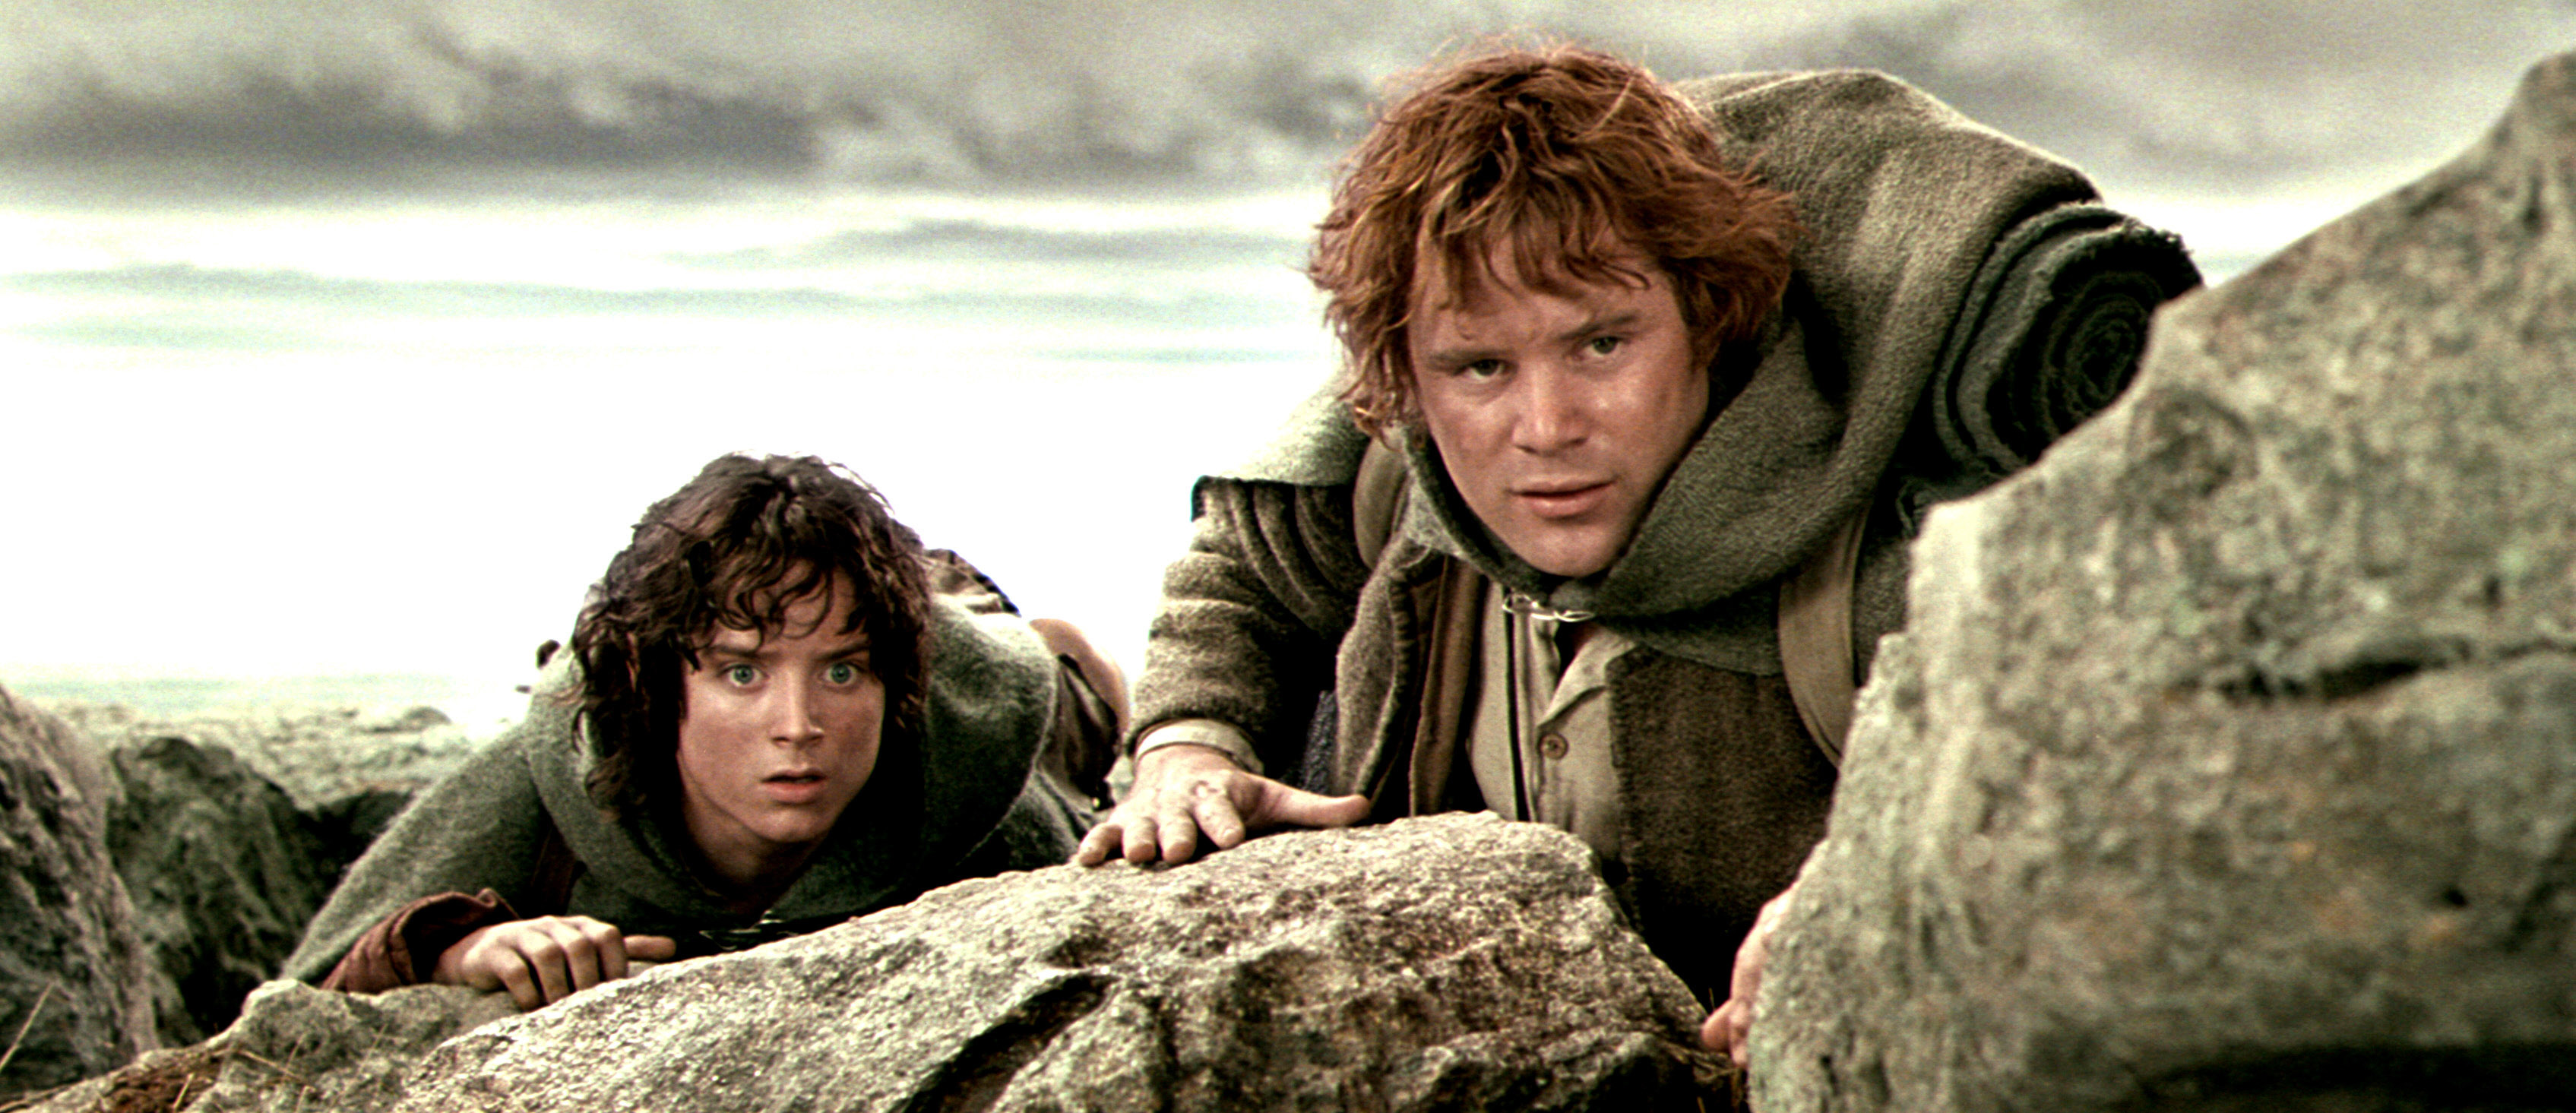 __"These Uber shares are all we have, Mr. Frodo"__